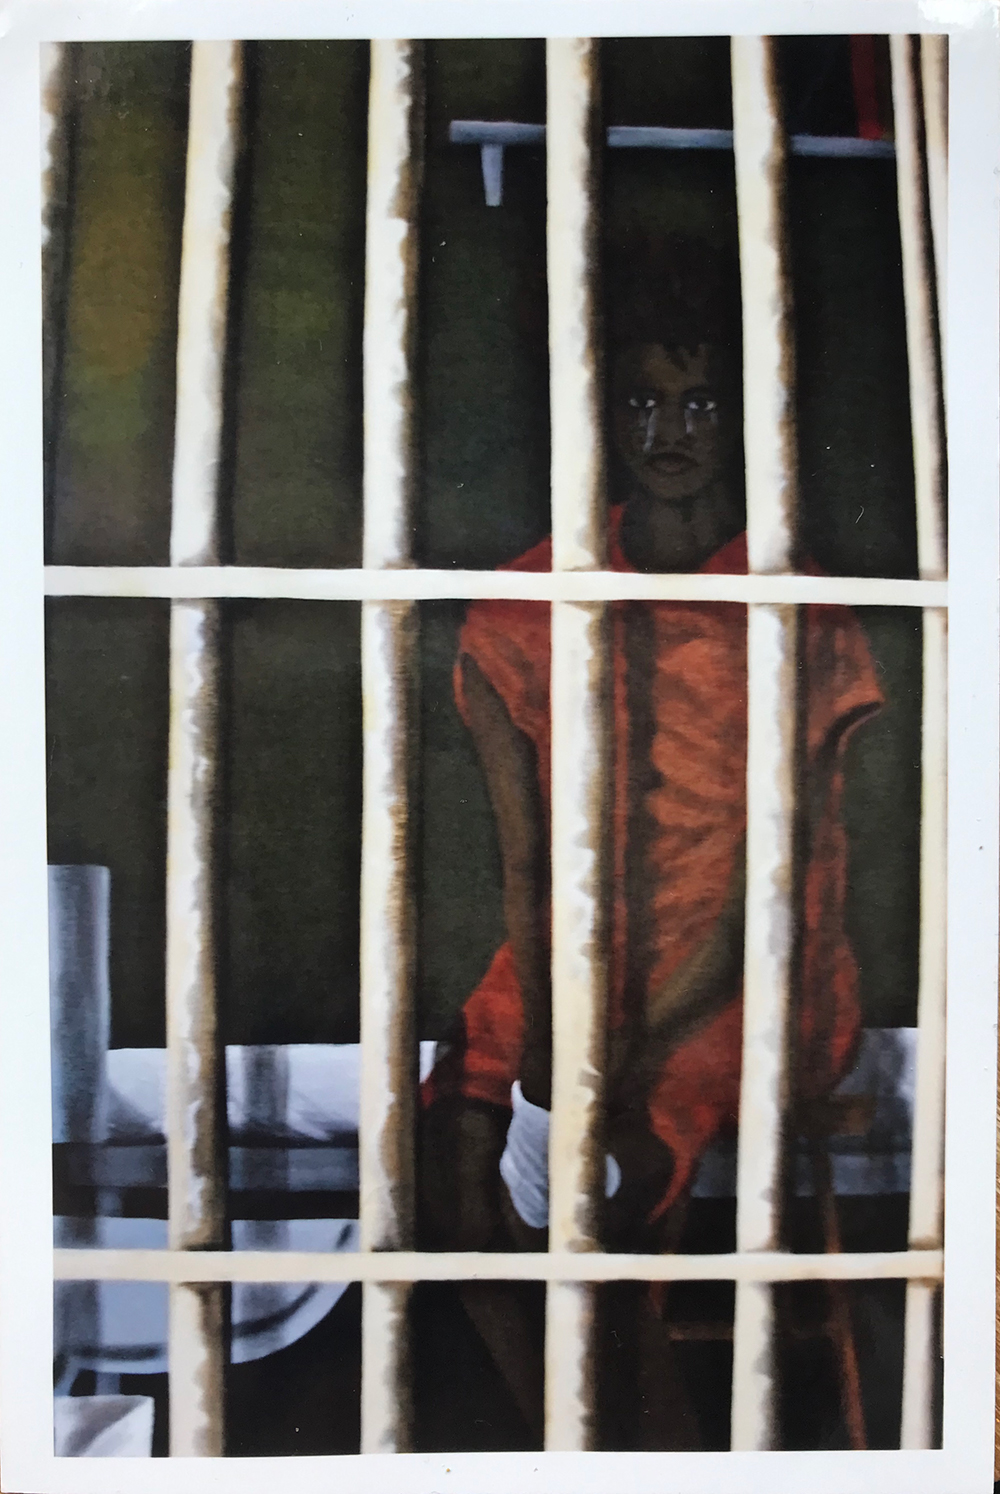 An acrylic painting of a woman in an orange uniform sitting in her cell, behind white bars. She is a Black woman and tears stream down her face. Above her is an empty shelf. To her right is a sink and toilet.